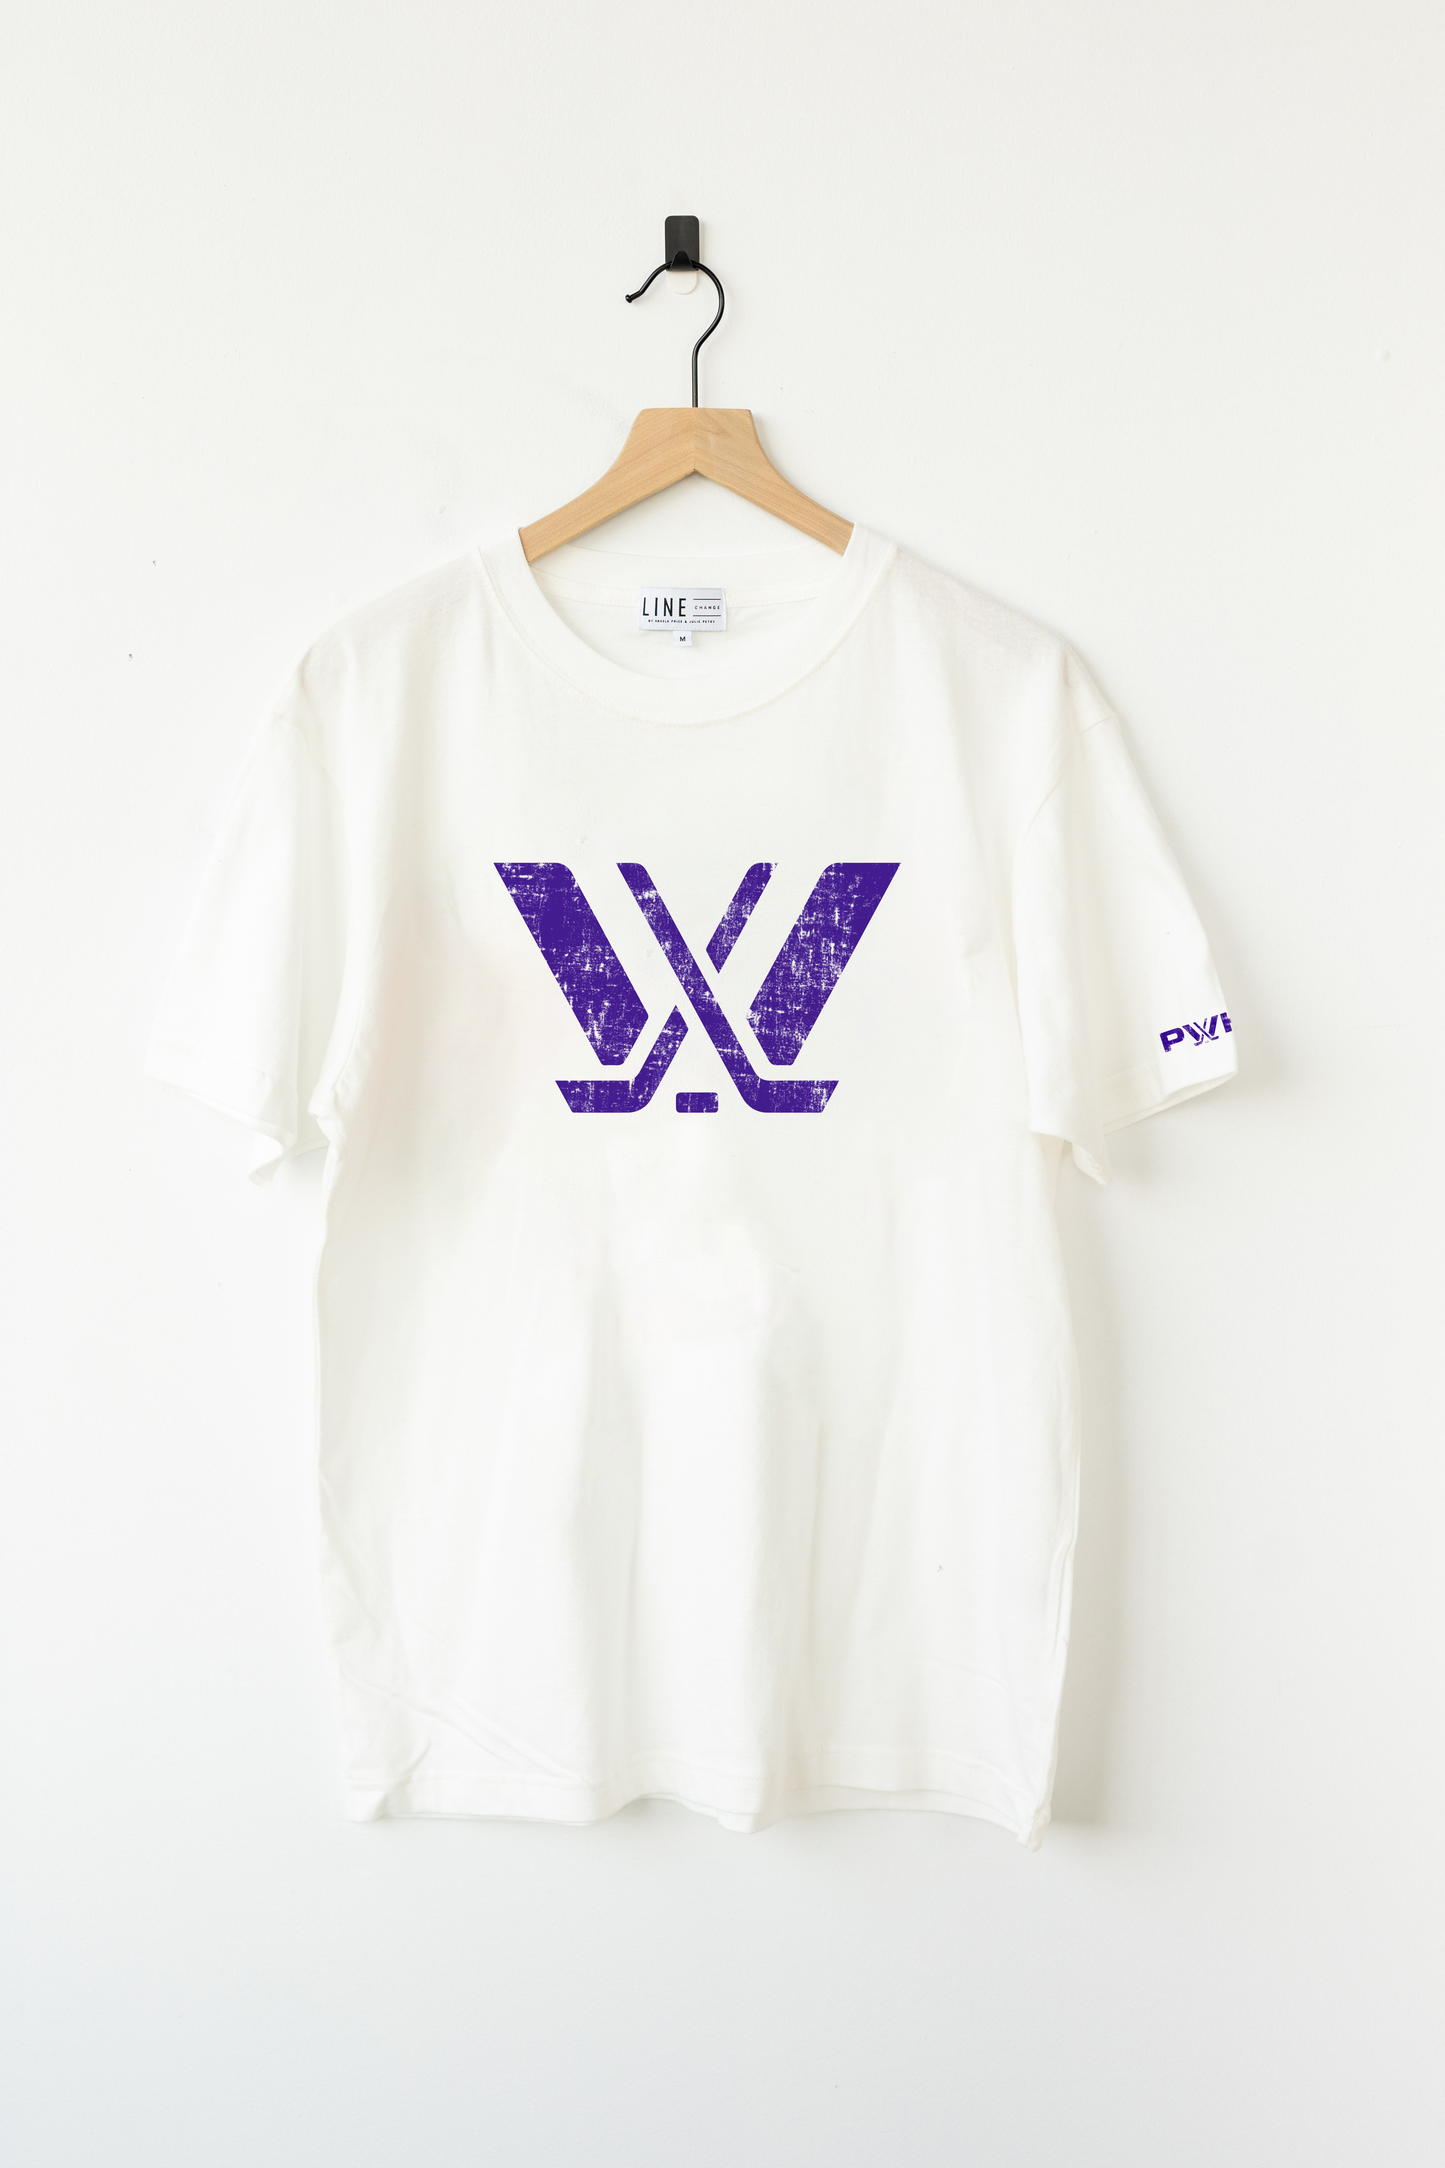 The PWHL Oversized Tee